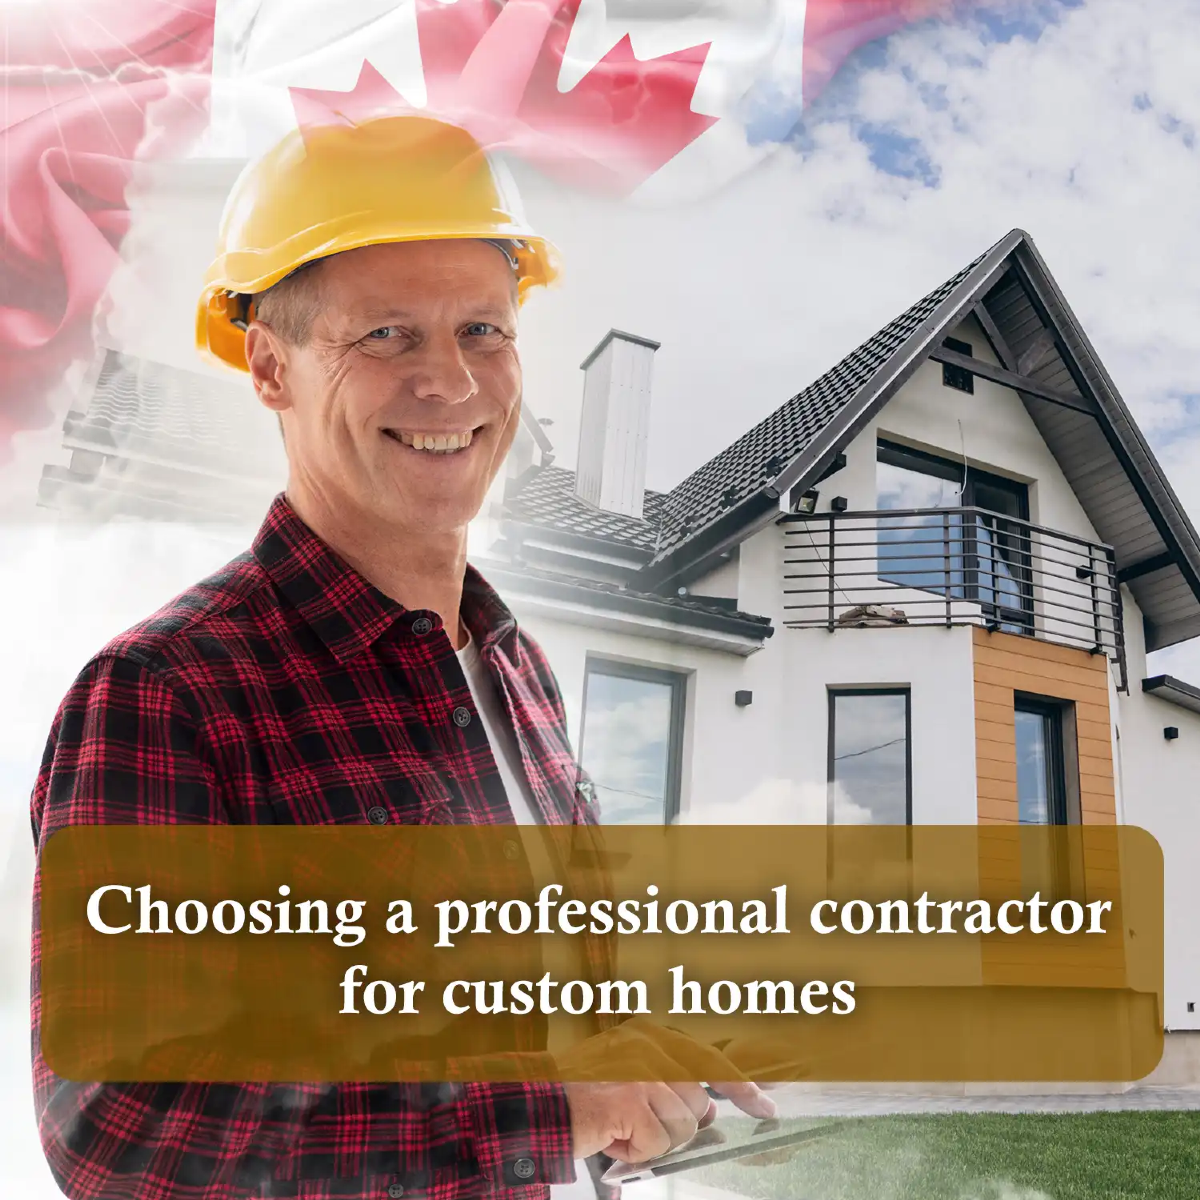 Choosing a professional contractor for custom homes